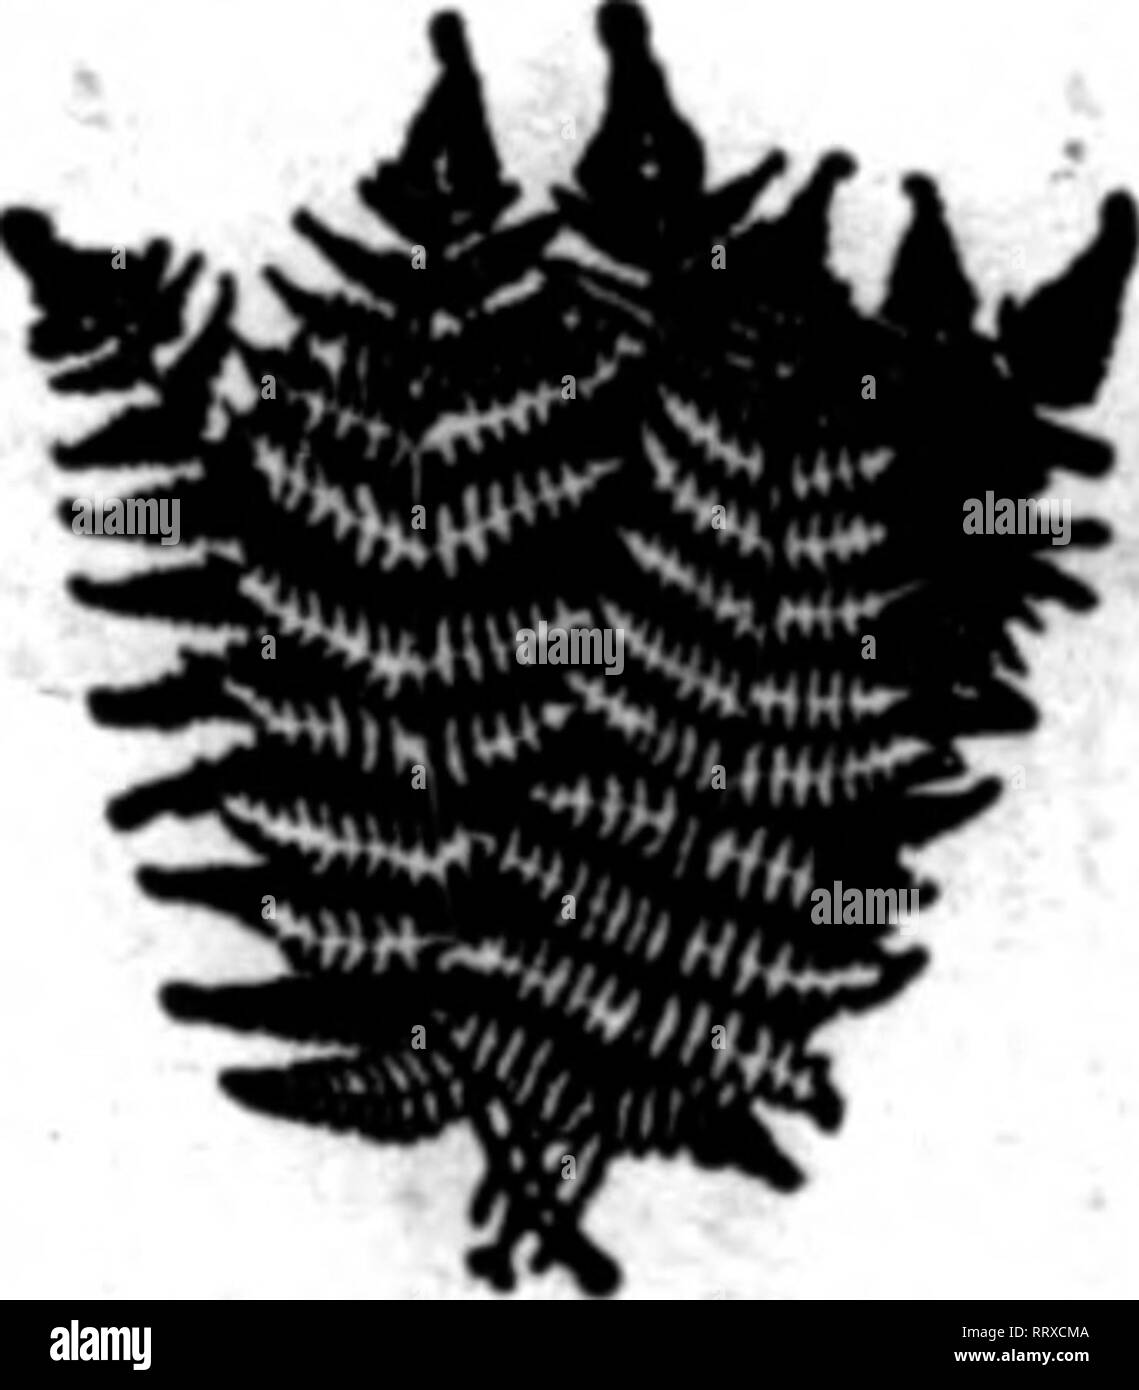 . Florists' review [microform]. Floriculture. NEW CROP NOW READY FERNS AND GREEN QALAX AND LEUCOTHOE. Dagger and Fancy Ferns. 1000, $1.00; case of 5,000. $4.00 GreenQalax 1000, .50; case of 10.000, 4.00 Bronze Galax (case lots only).. ..$5.00 per case of 10,000 Green Leucothoe (long) '. $2.00 per 1000 Green Leucethoe (short) 1.00 per 1000 Wbea in a hurry, wire us at Elk Park, K. C. THE NORTH CAROLINA EVERGREEN CO. BANNERS ELK, N. C.. Mention The Review when yon write. L. B. Brague ft Son Wholesale nilT CCDIIC Dealers in UU I rClillO Moss, Oirbbnas Trees, Baled Spruce, Evergreens Established 18 Stock Photo